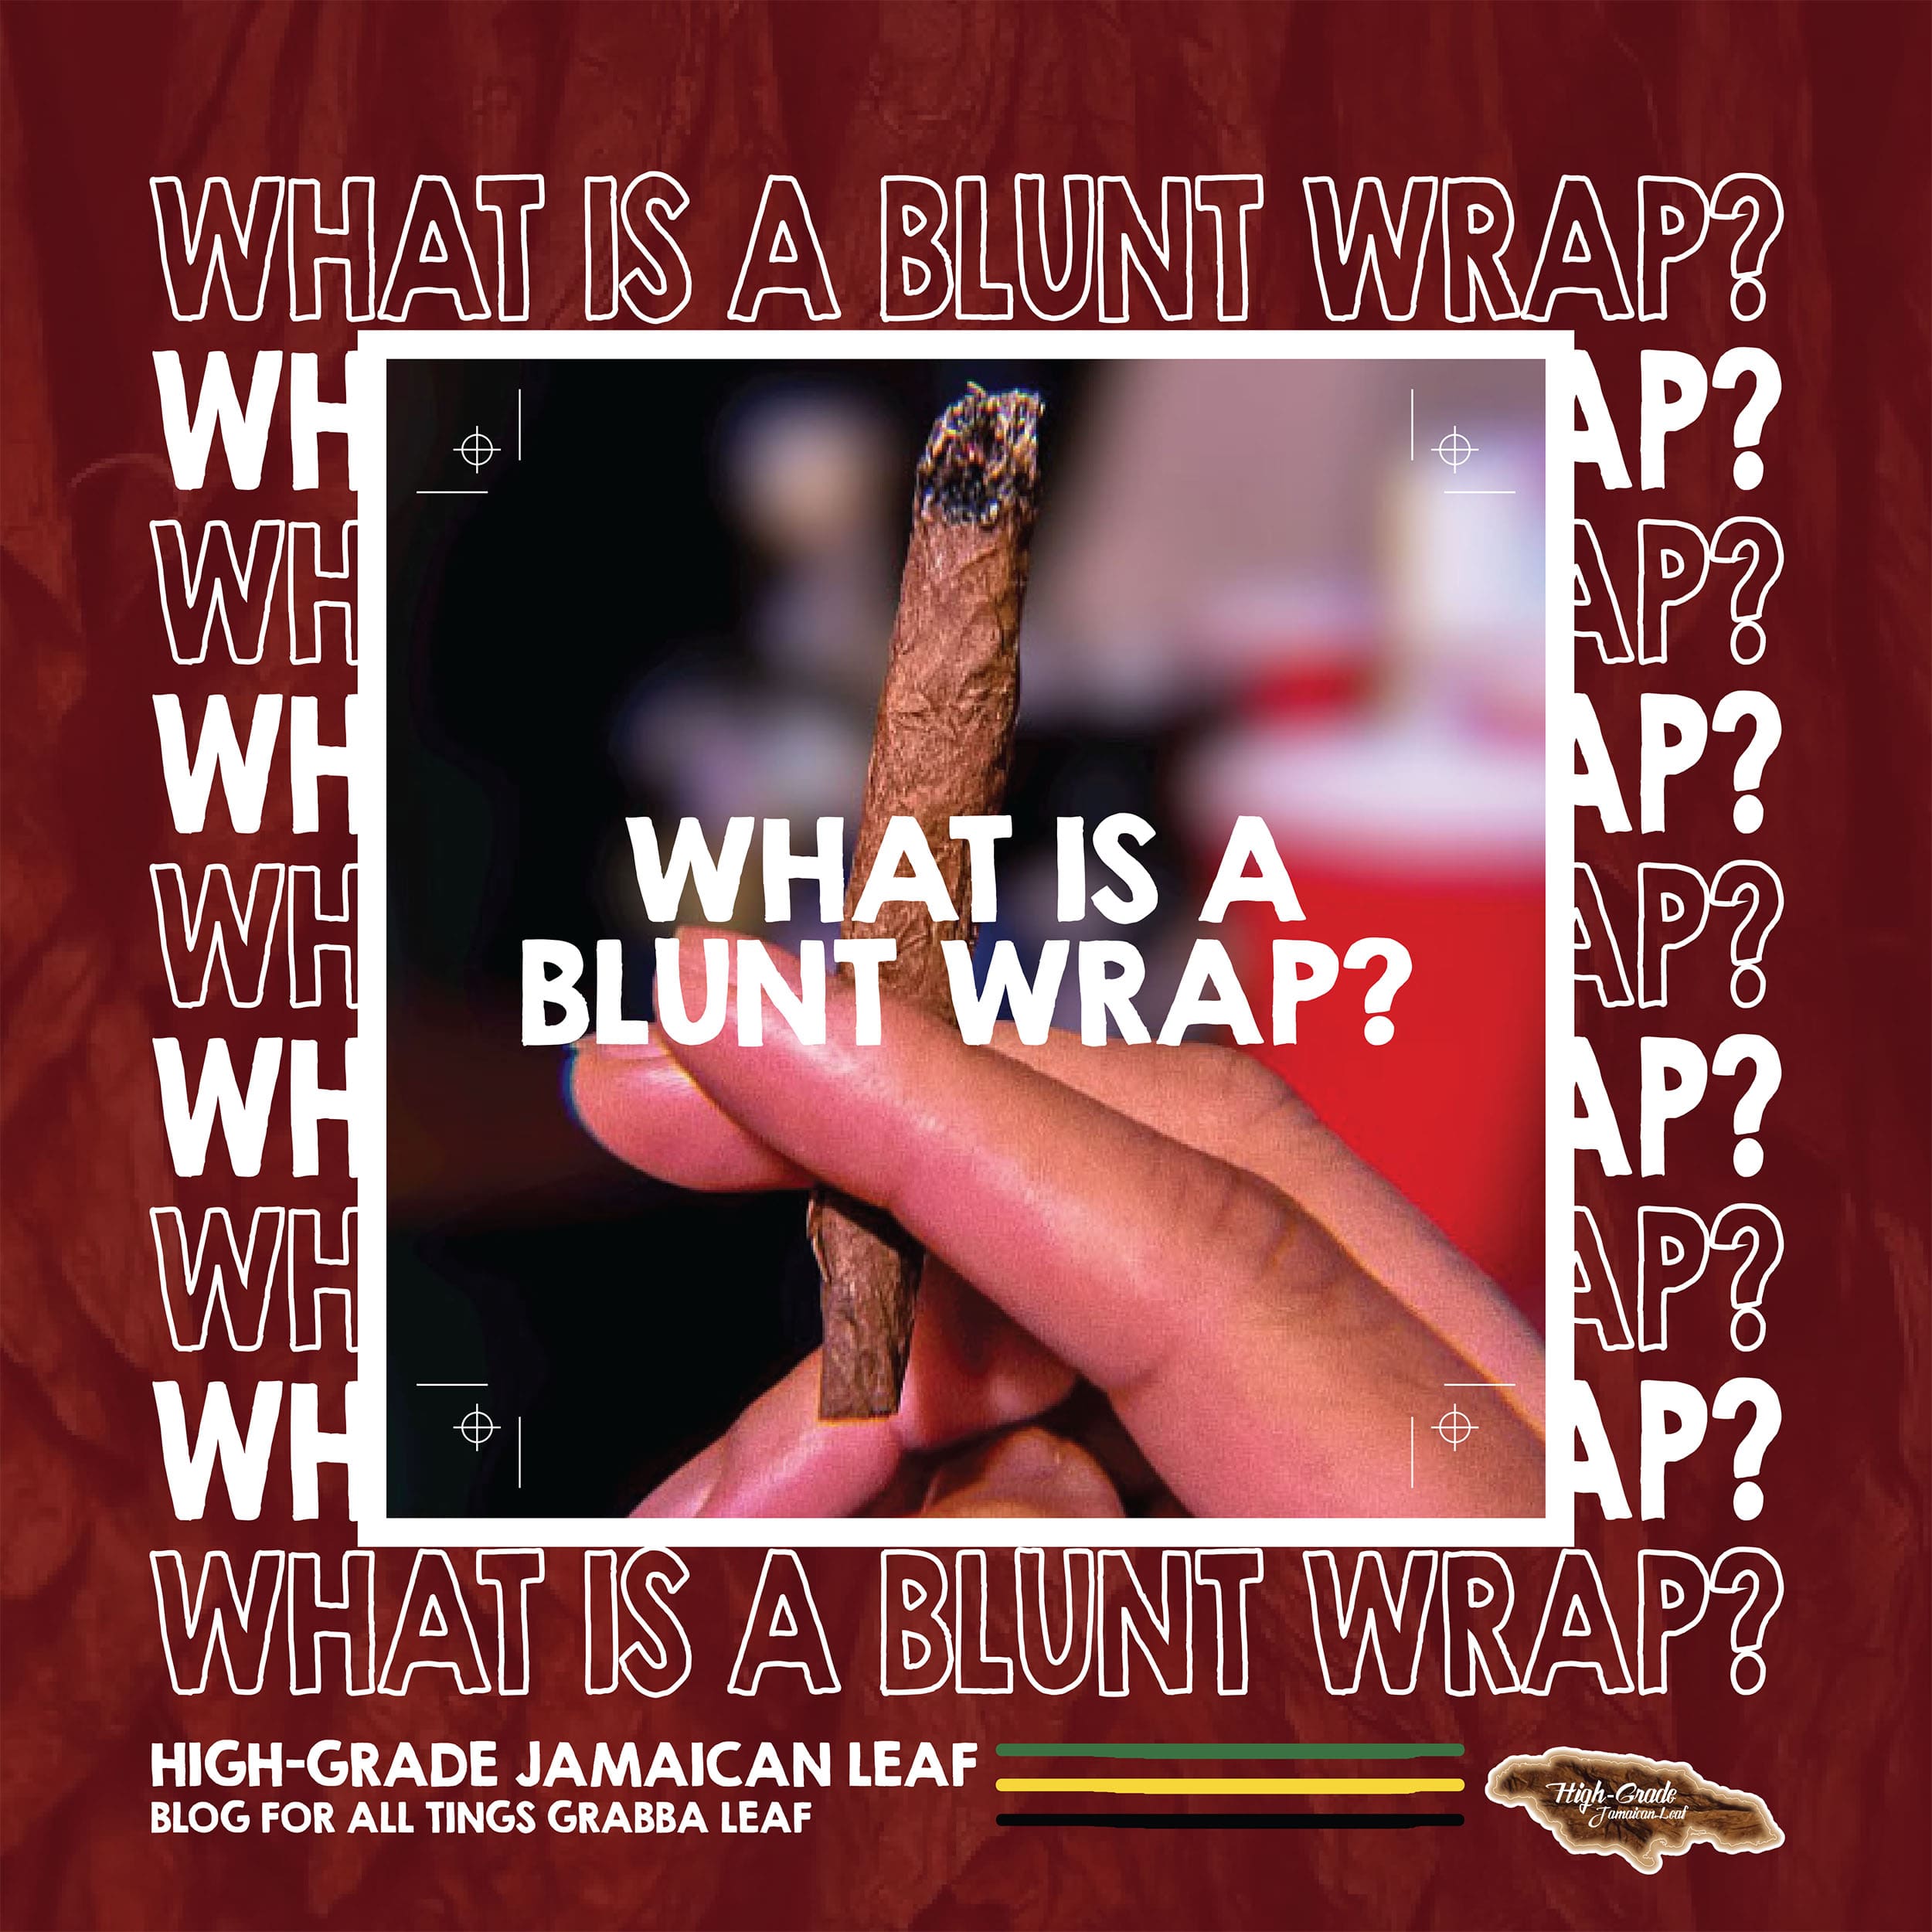 People who smoke blunts what wrap do you use? Grabba leaf is the only  way to go for me! : r/FLMedicalTrees